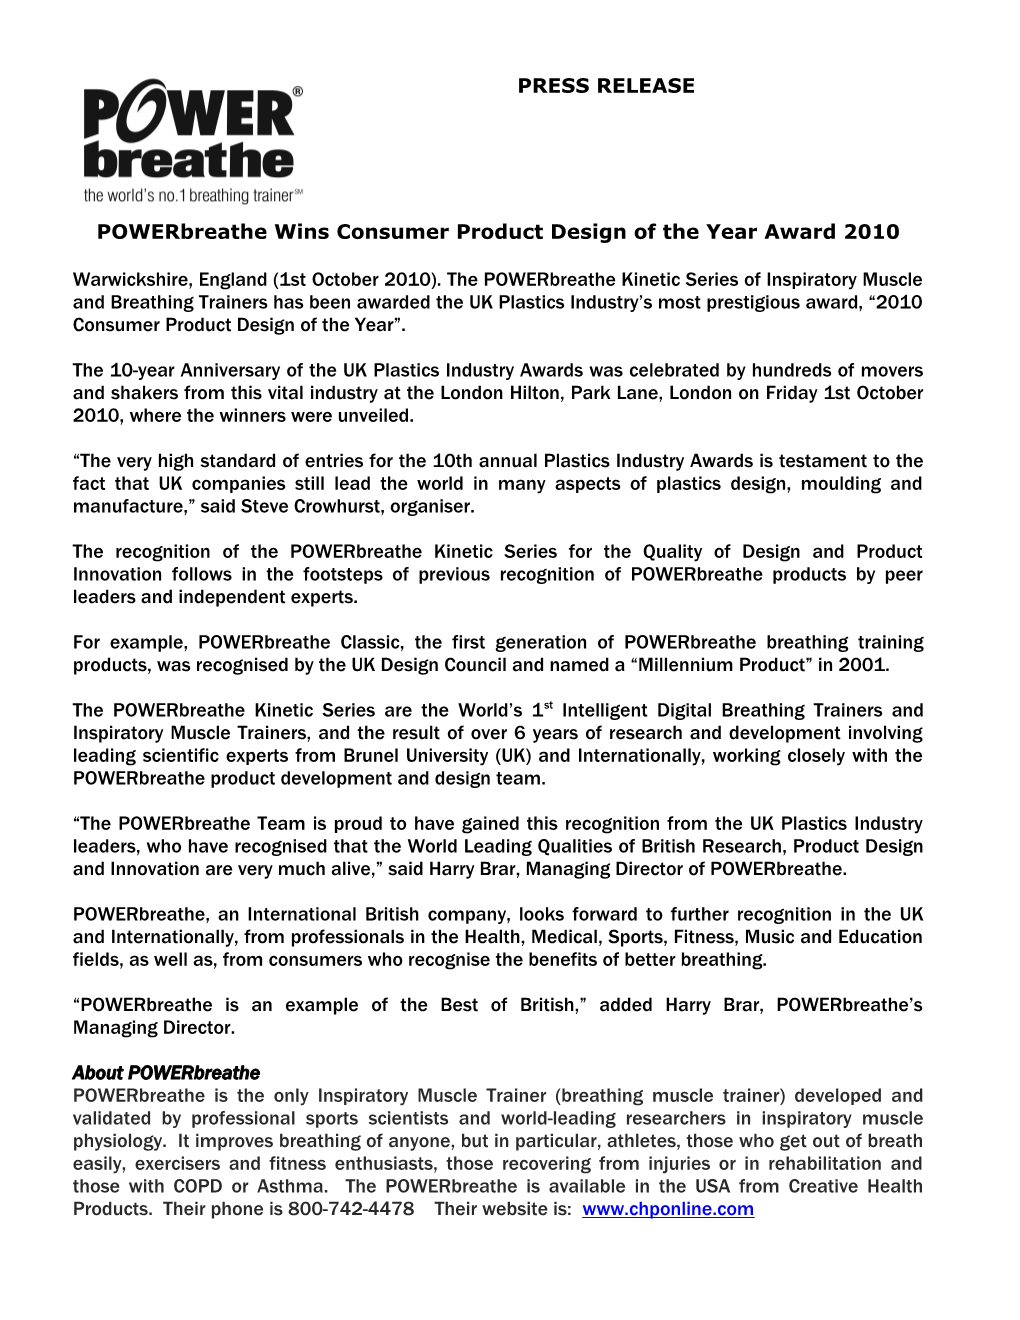 Powerbreathe Wins Consumer Product Design of the Year Award 2010